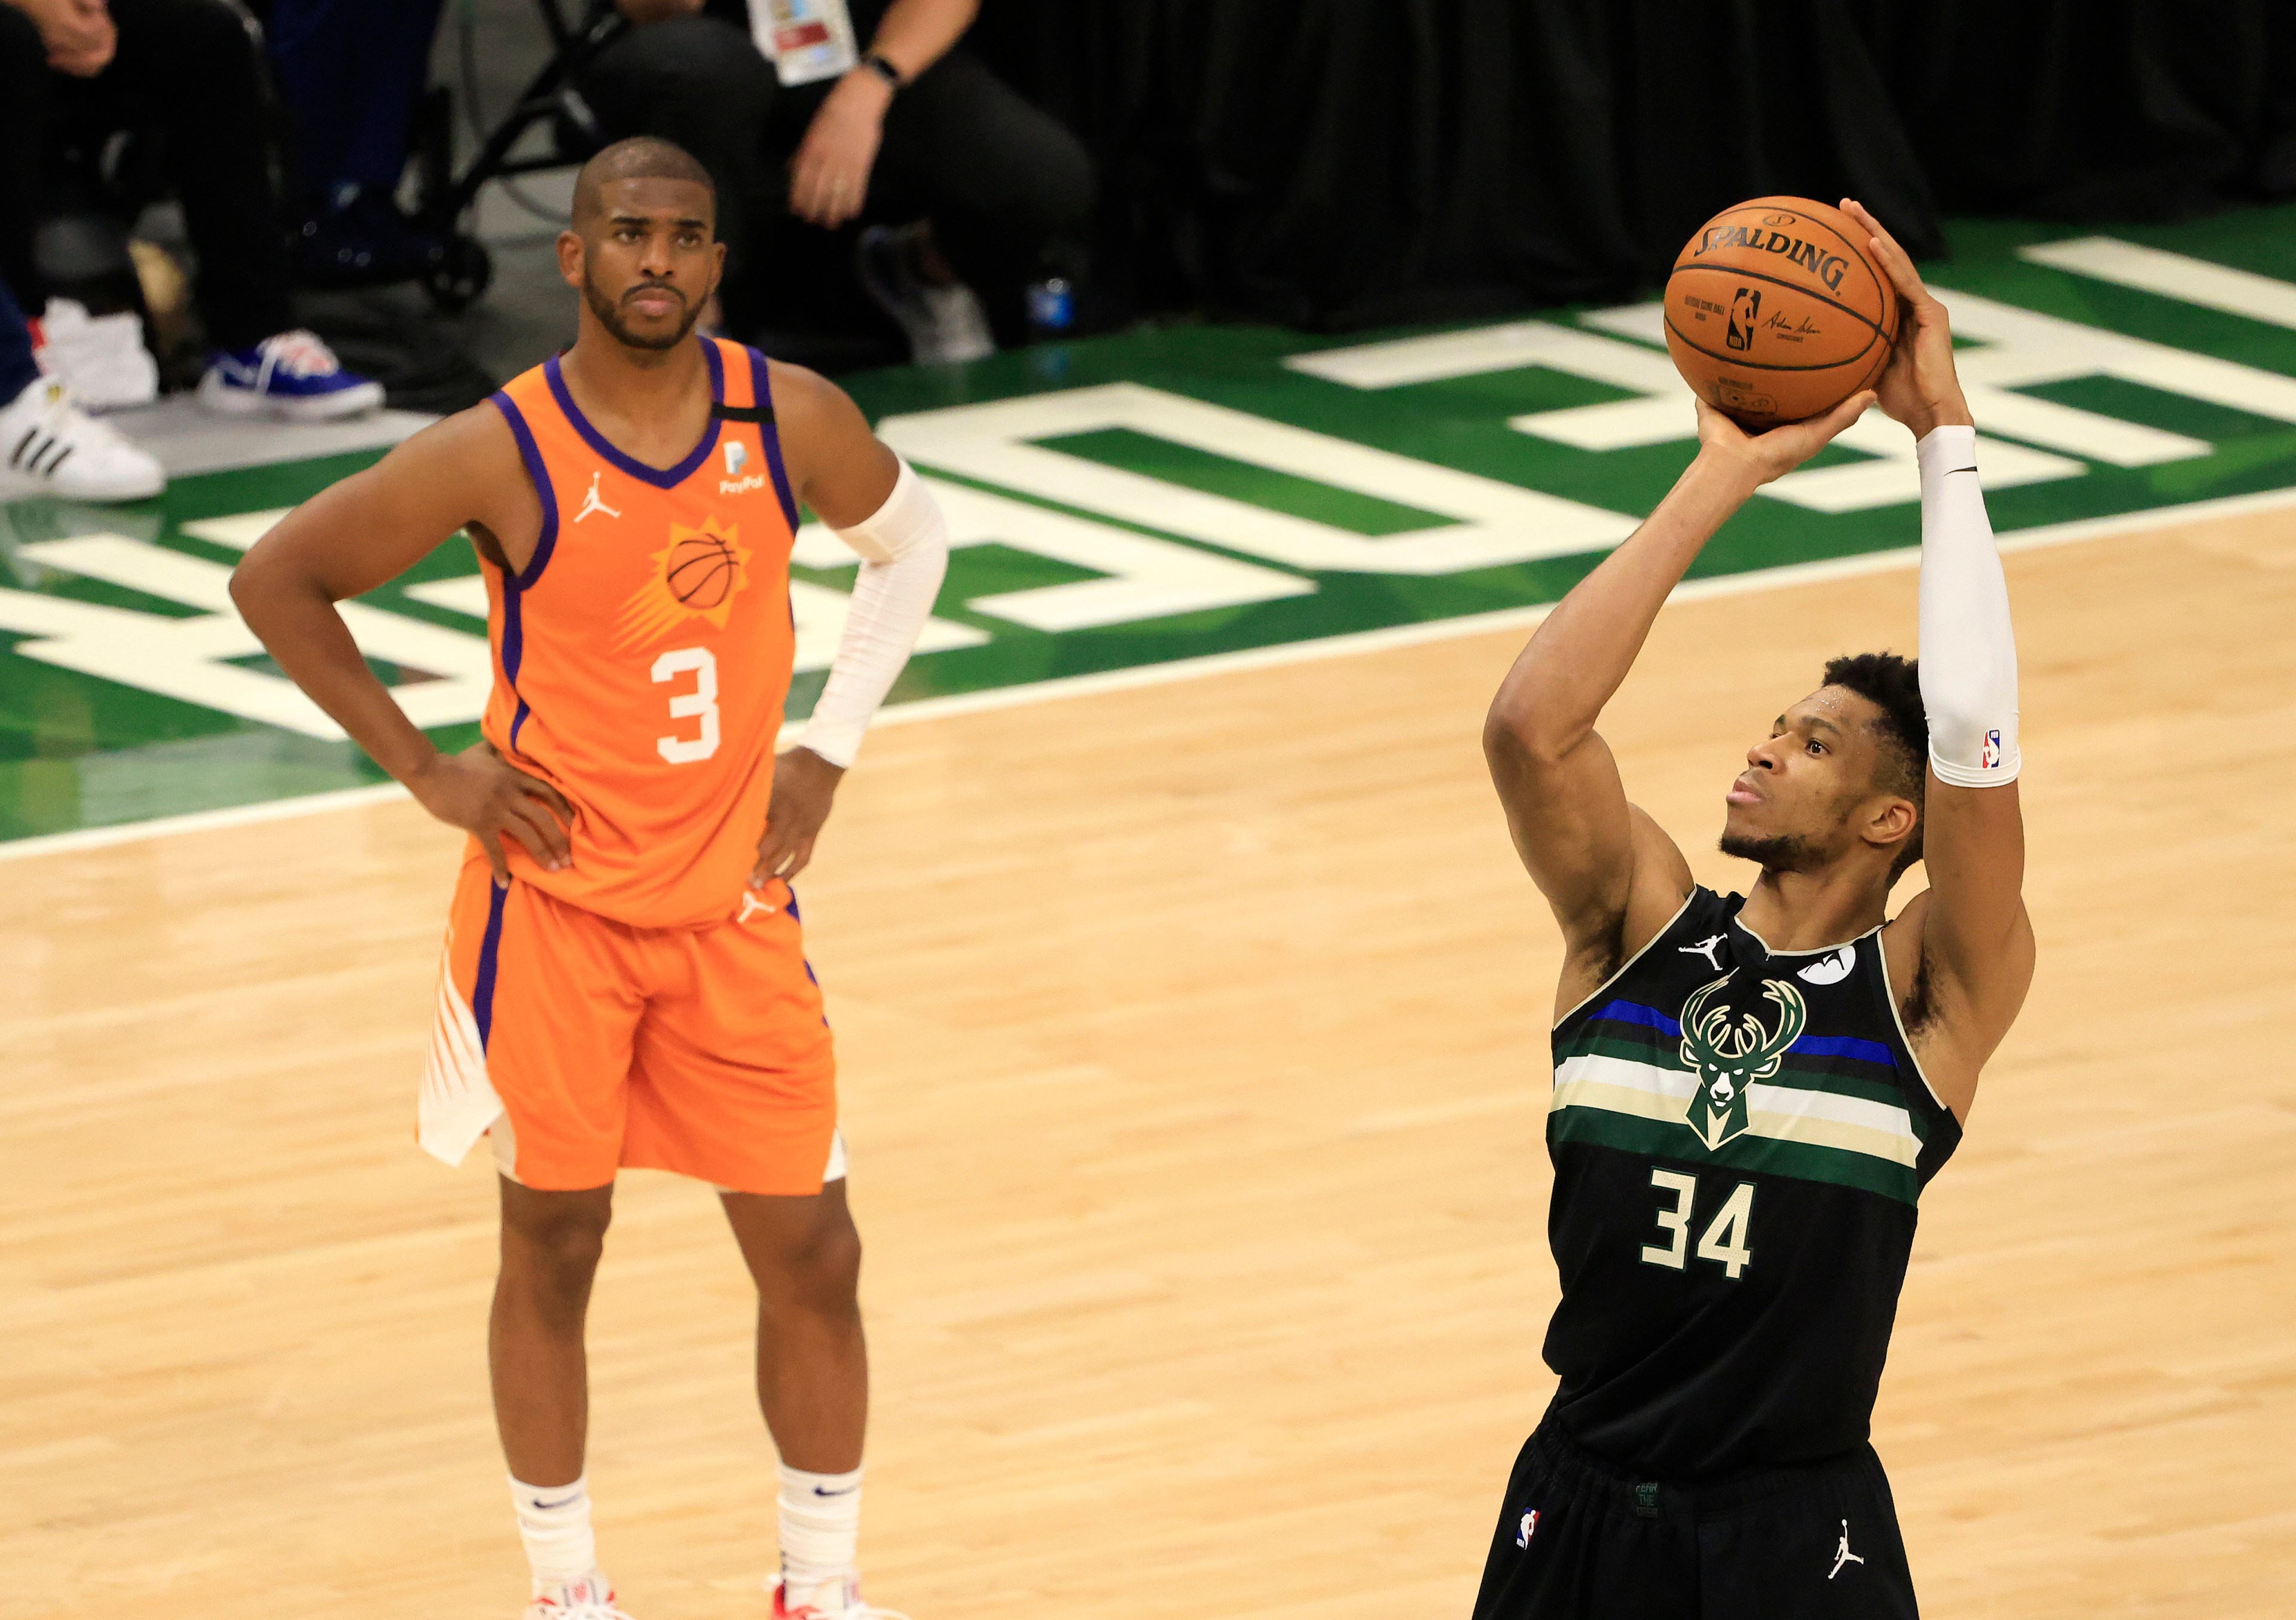 MILWAUKEE, WISCONSIN - JULY 20: Giannis Antetokounmpo #34 of the Milwaukee Bucks shoots a free throw as Chris Paul #3 of the Phoenix Suns watches during the second half in Game Six of the NBA Finals at Fiserv Forum on July 20, 2021 in Milwaukee, Wisconsin. NOTE TO USER: User expressly acknowledges and agrees that, by downloading and or using this photograph, User is consenting to the terms and conditions of the Getty Images License Agreement.